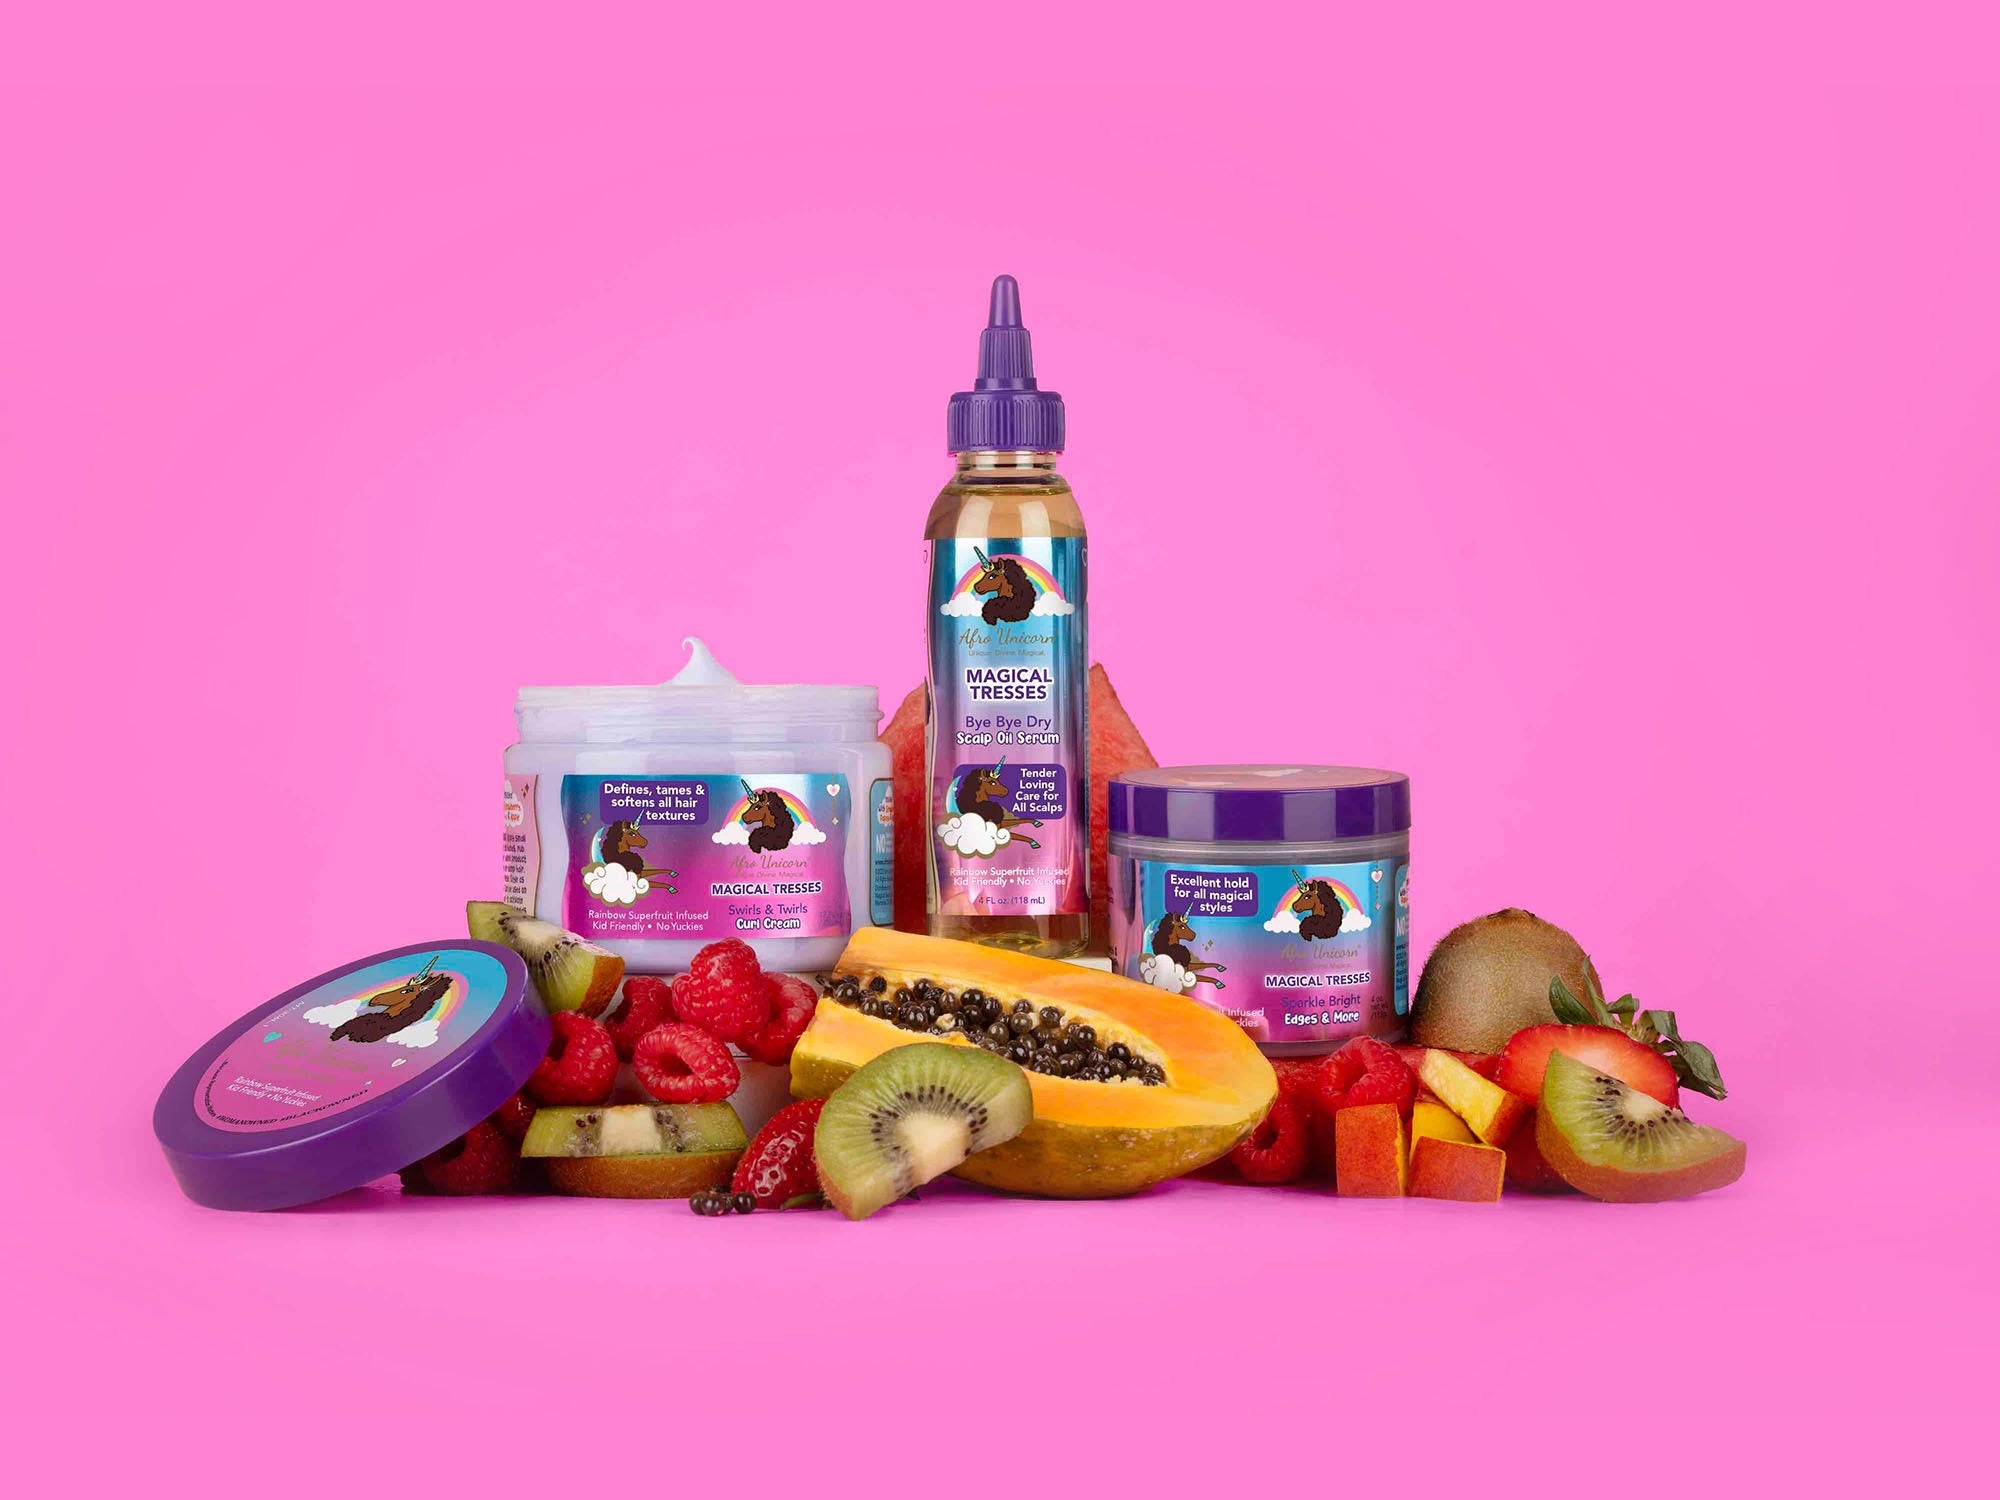 Afro Unicorn products with freshly cut fruit on a pink background.